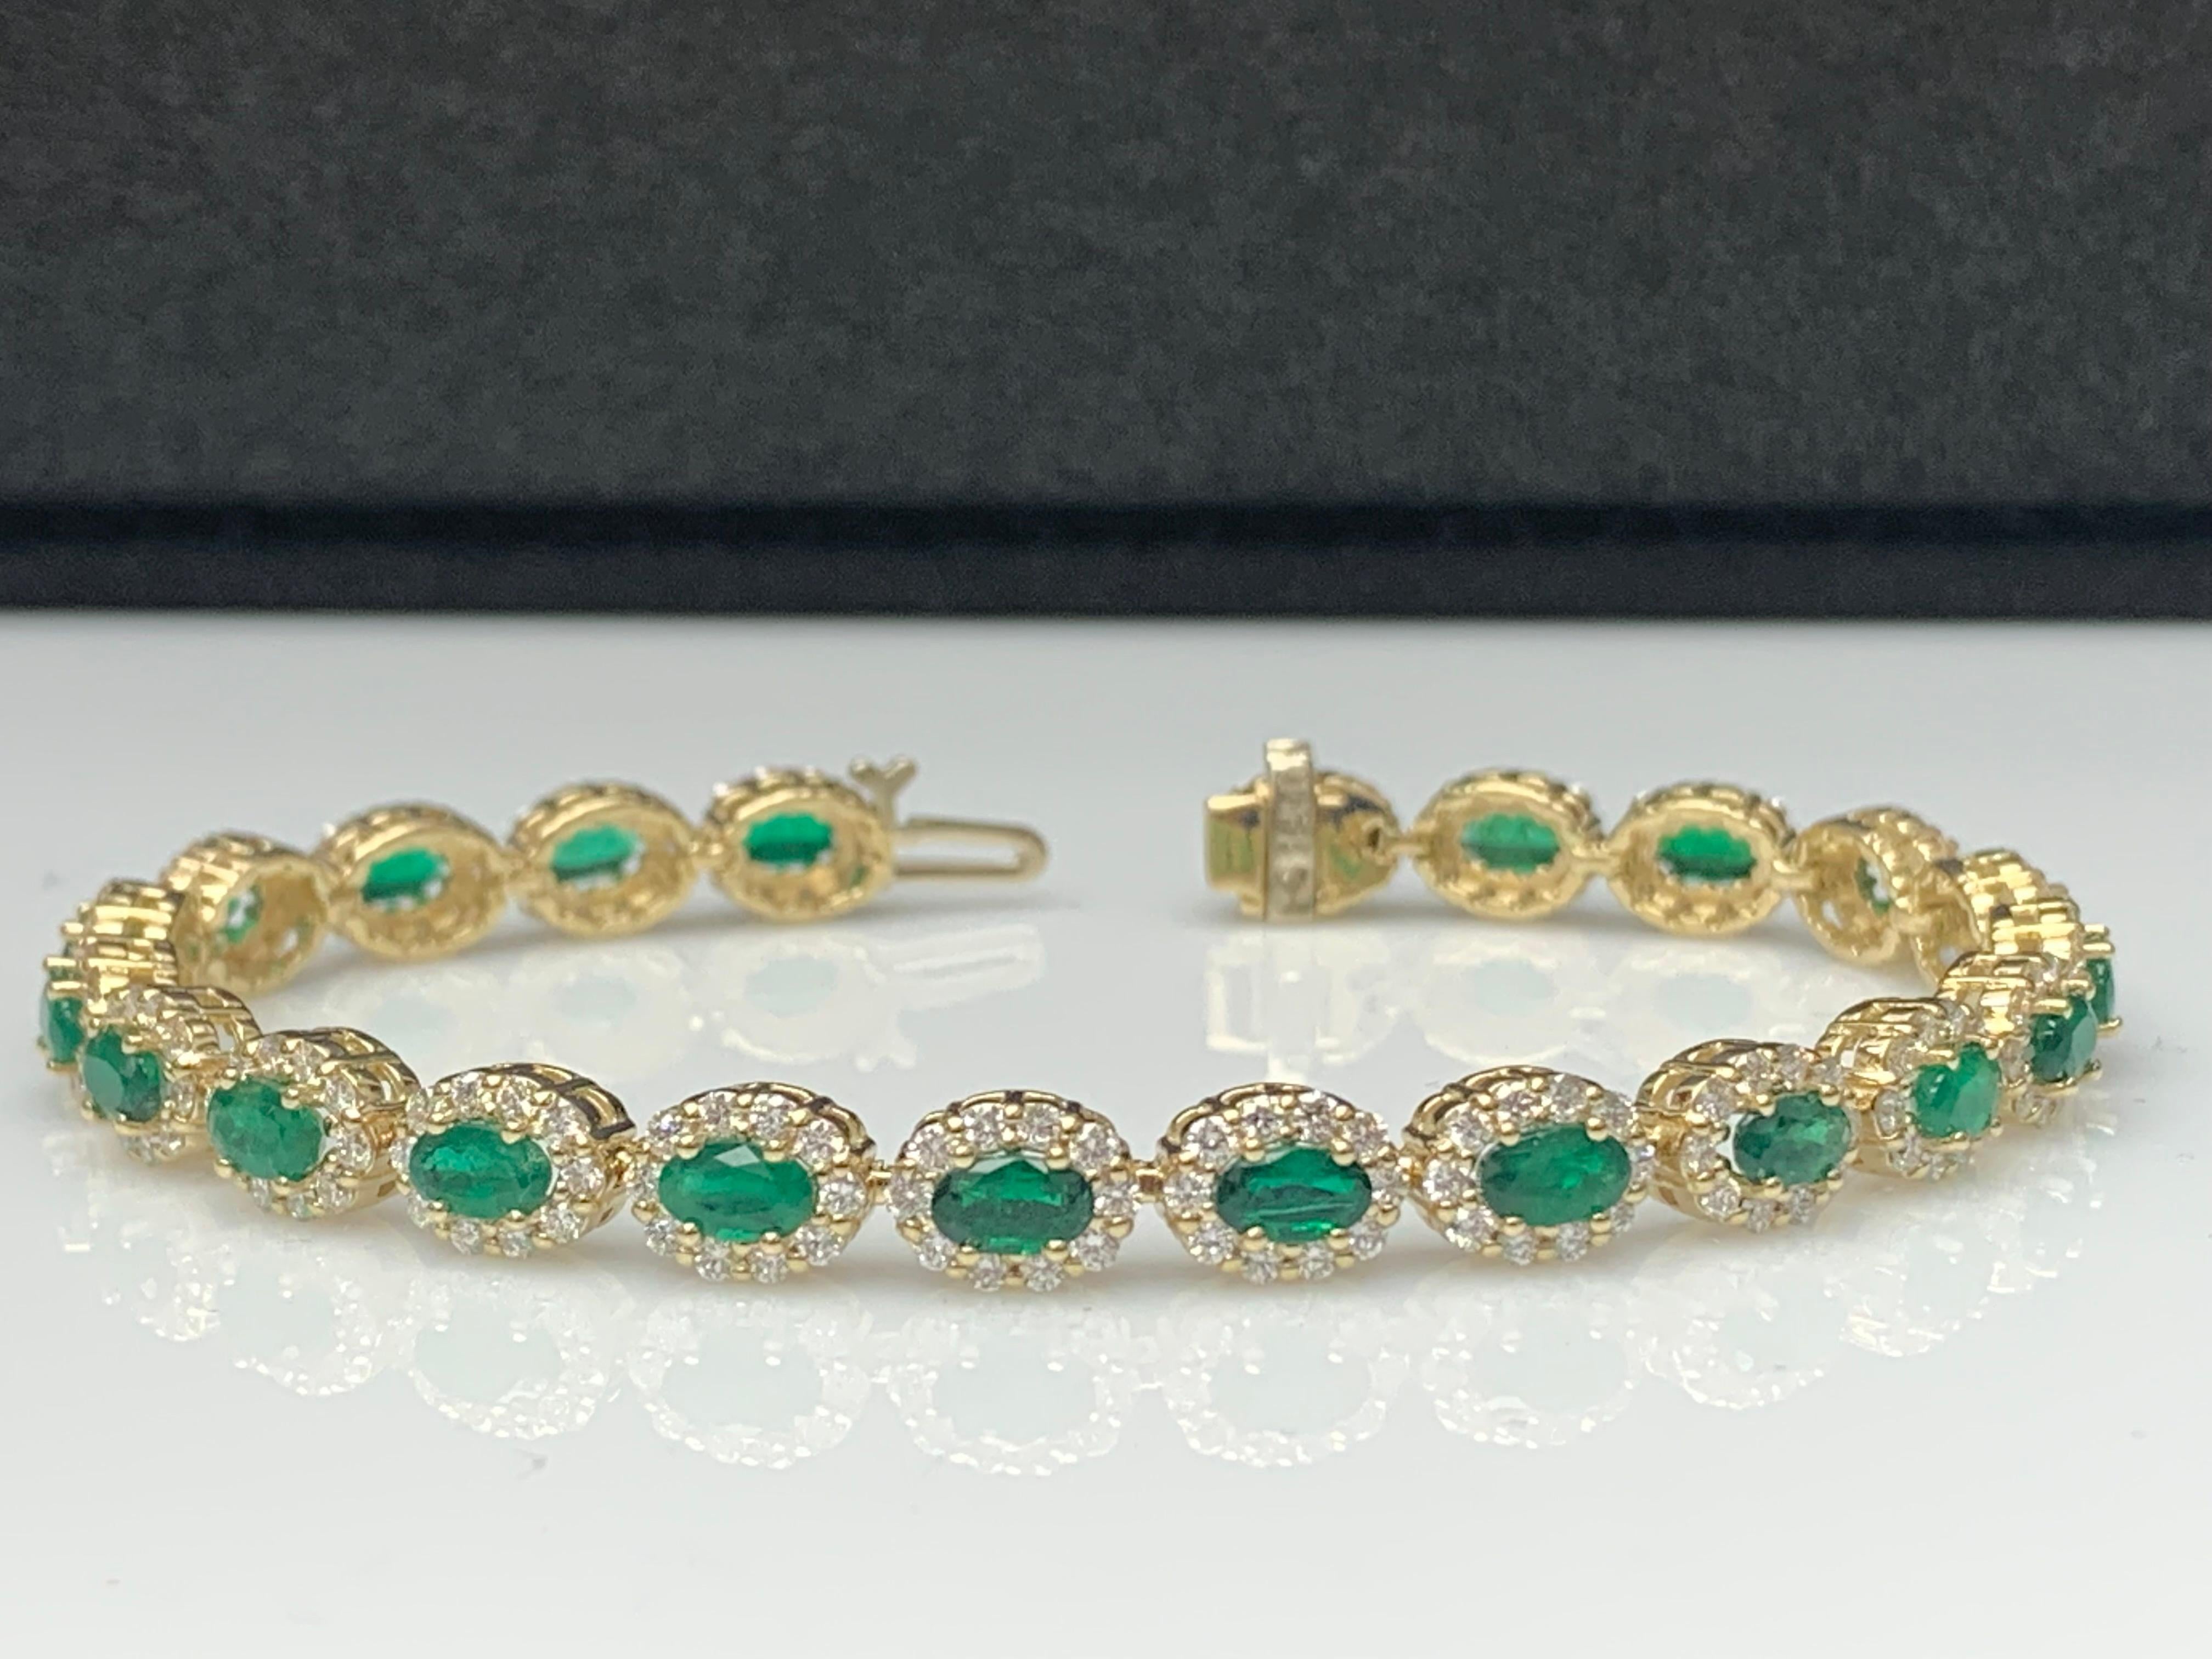 4.69 Carat Oval Cut Emerald and Diamond Halo Bracelet in 14K Yellow Gold For Sale 6